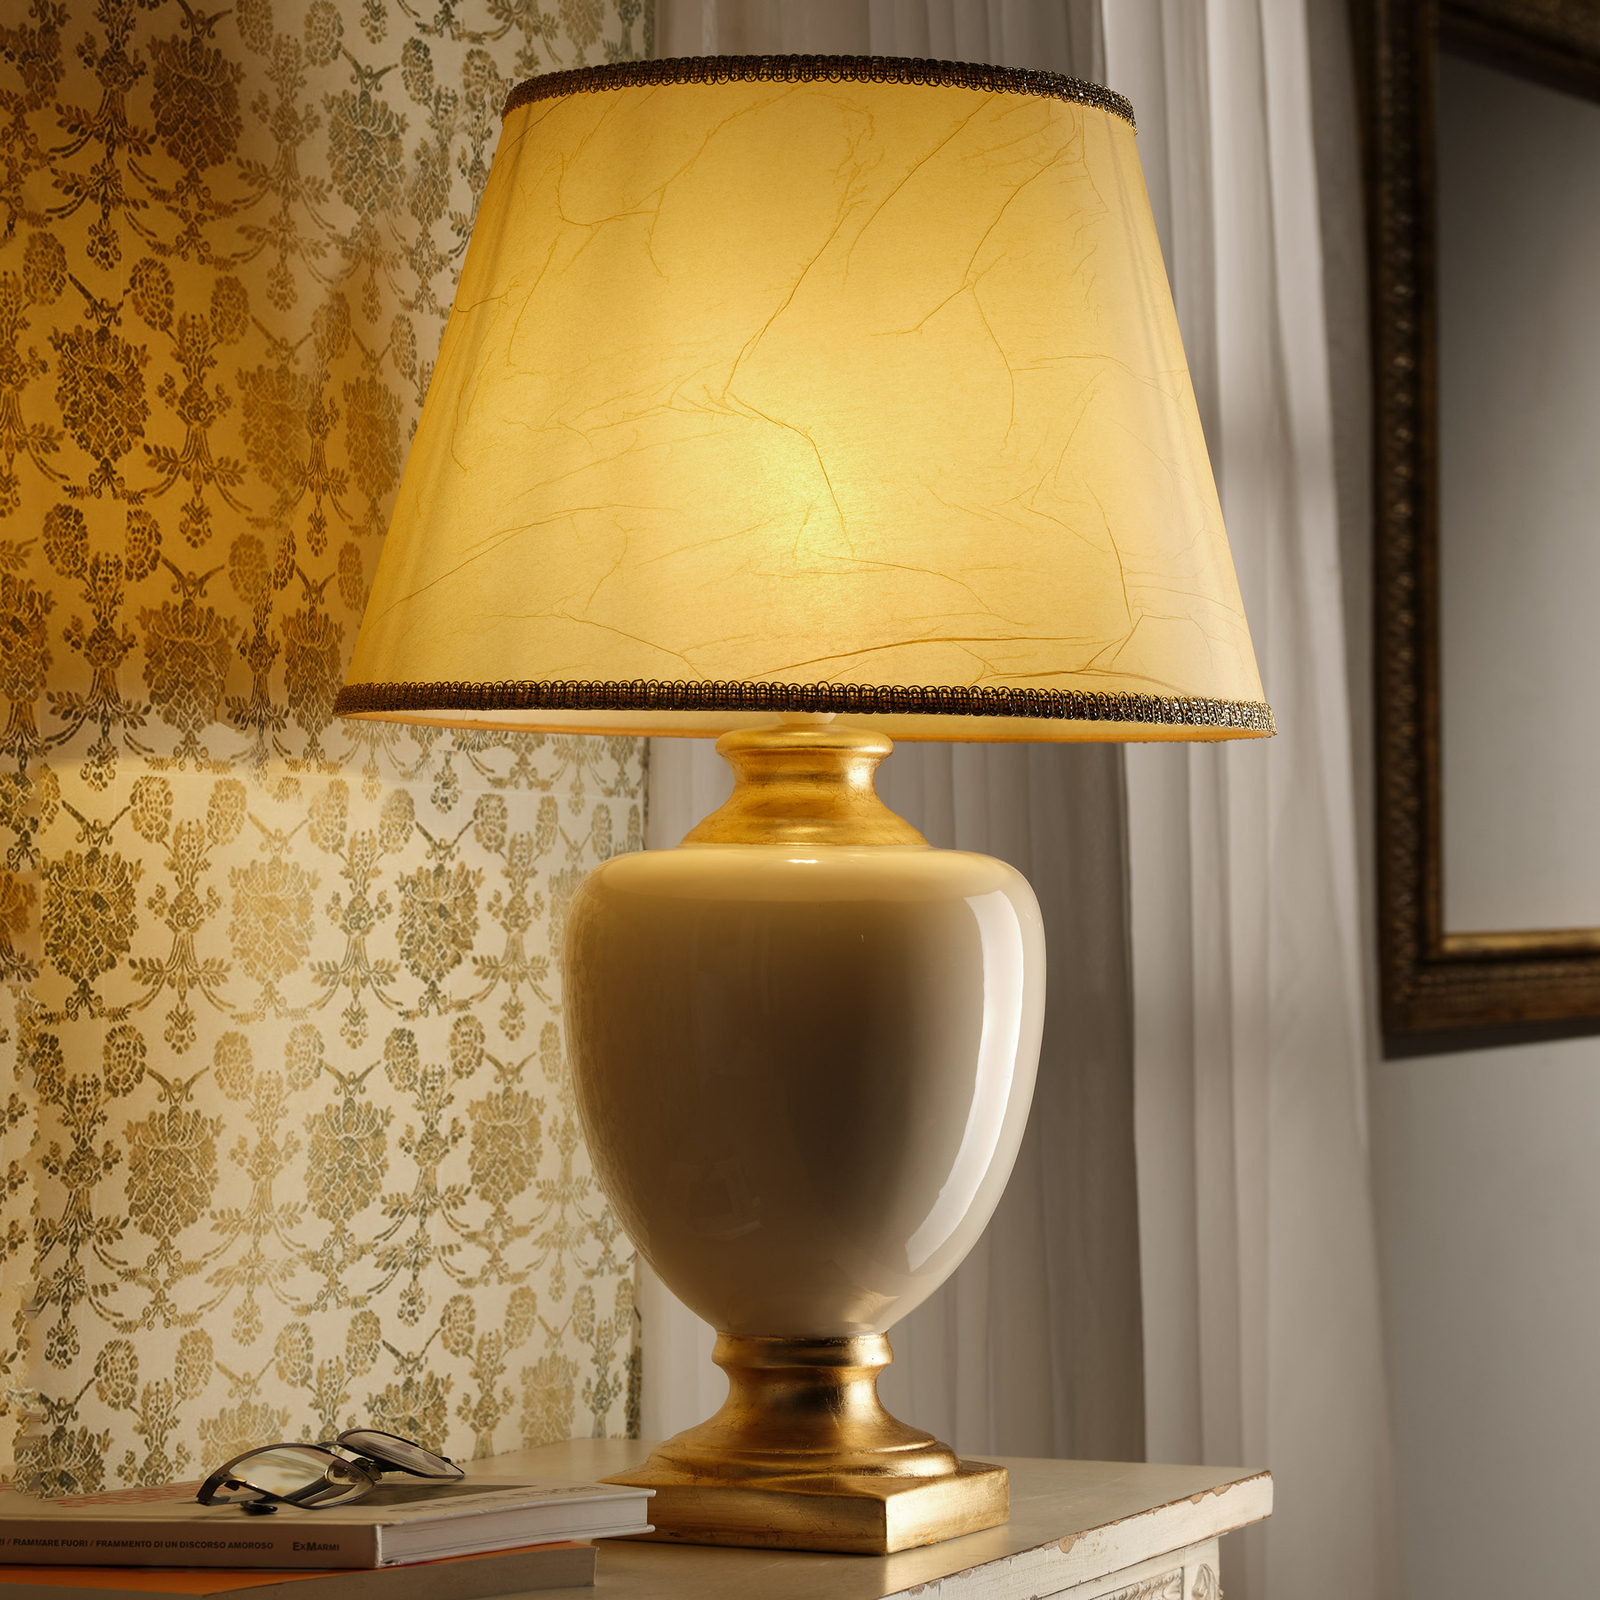 Mozart table lamp in ivory/gold